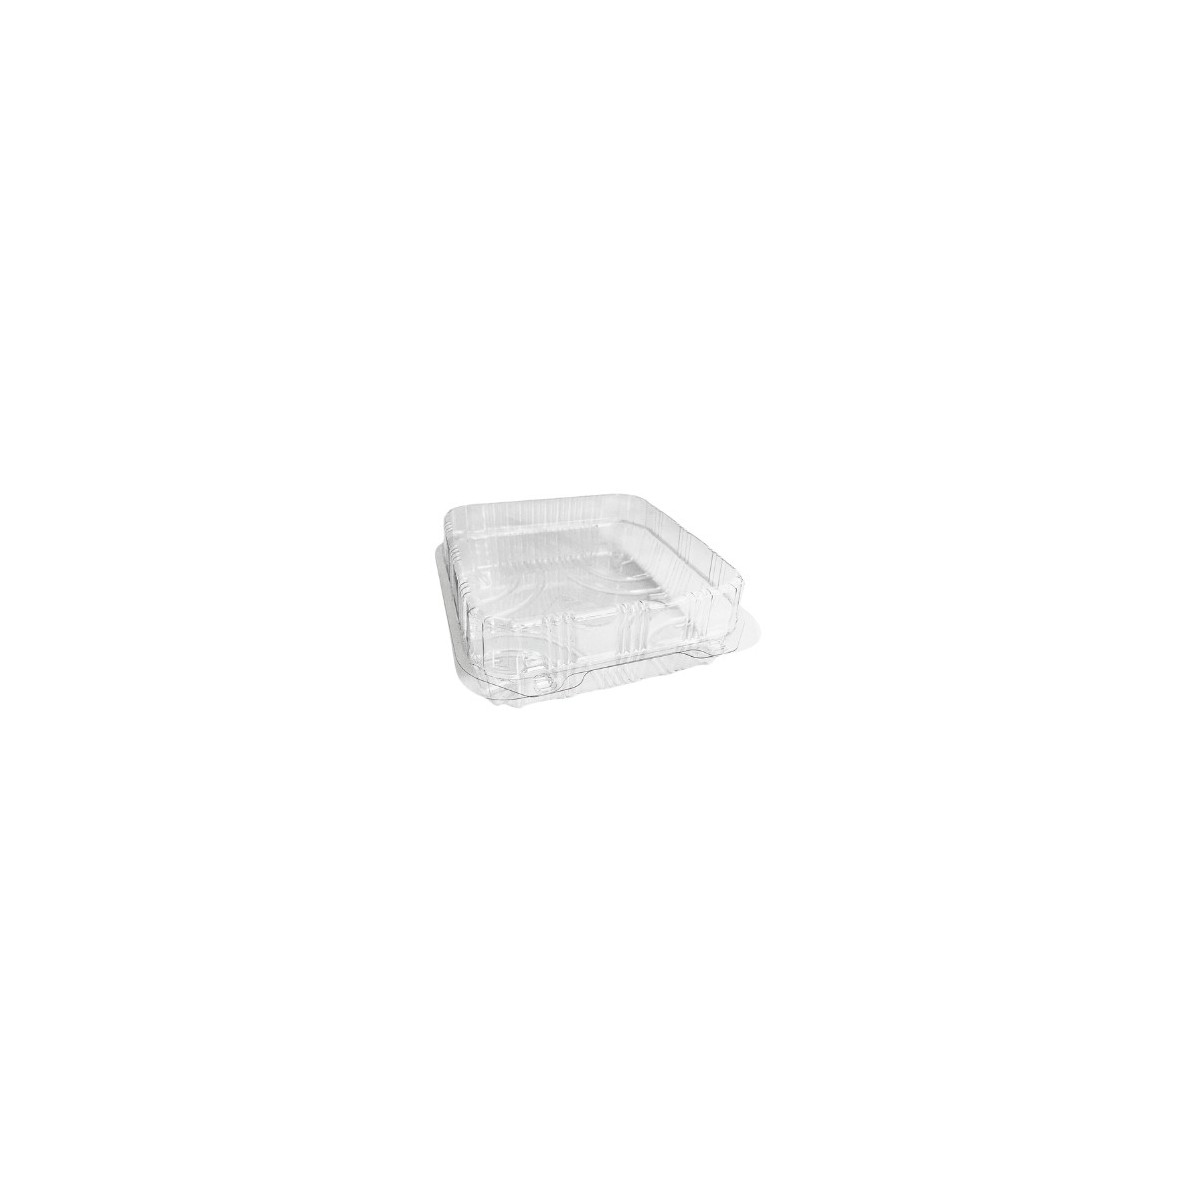 PATIPACK SQUARE PASTRY BOX 16,5X16,5X6,5CM VENTILATED HINGED LID 320PCS 